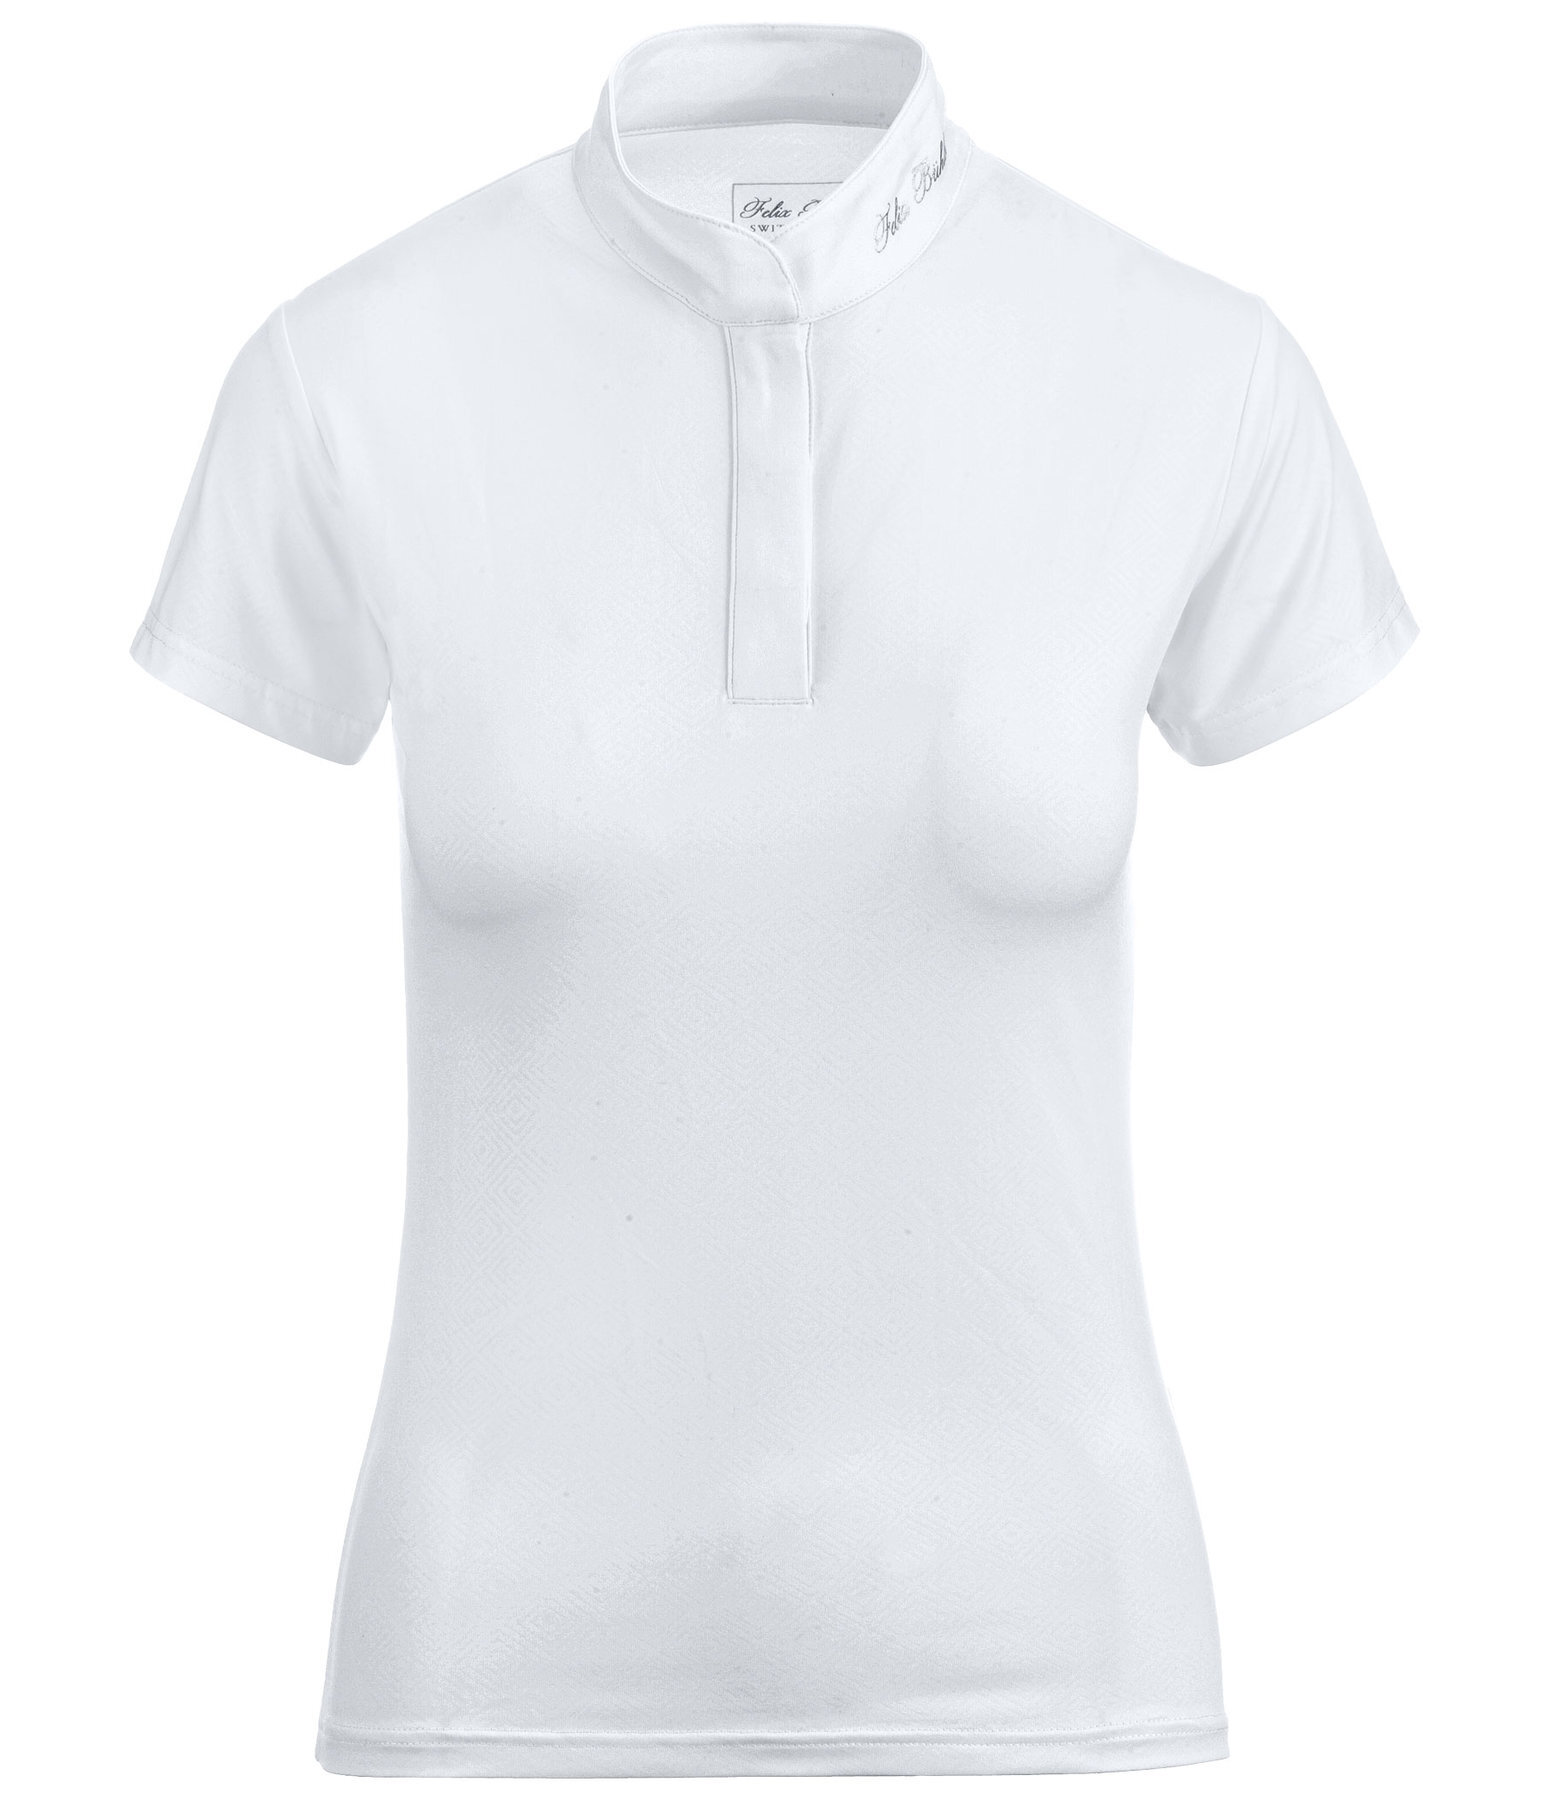 Functional Competition Shirt Charlet